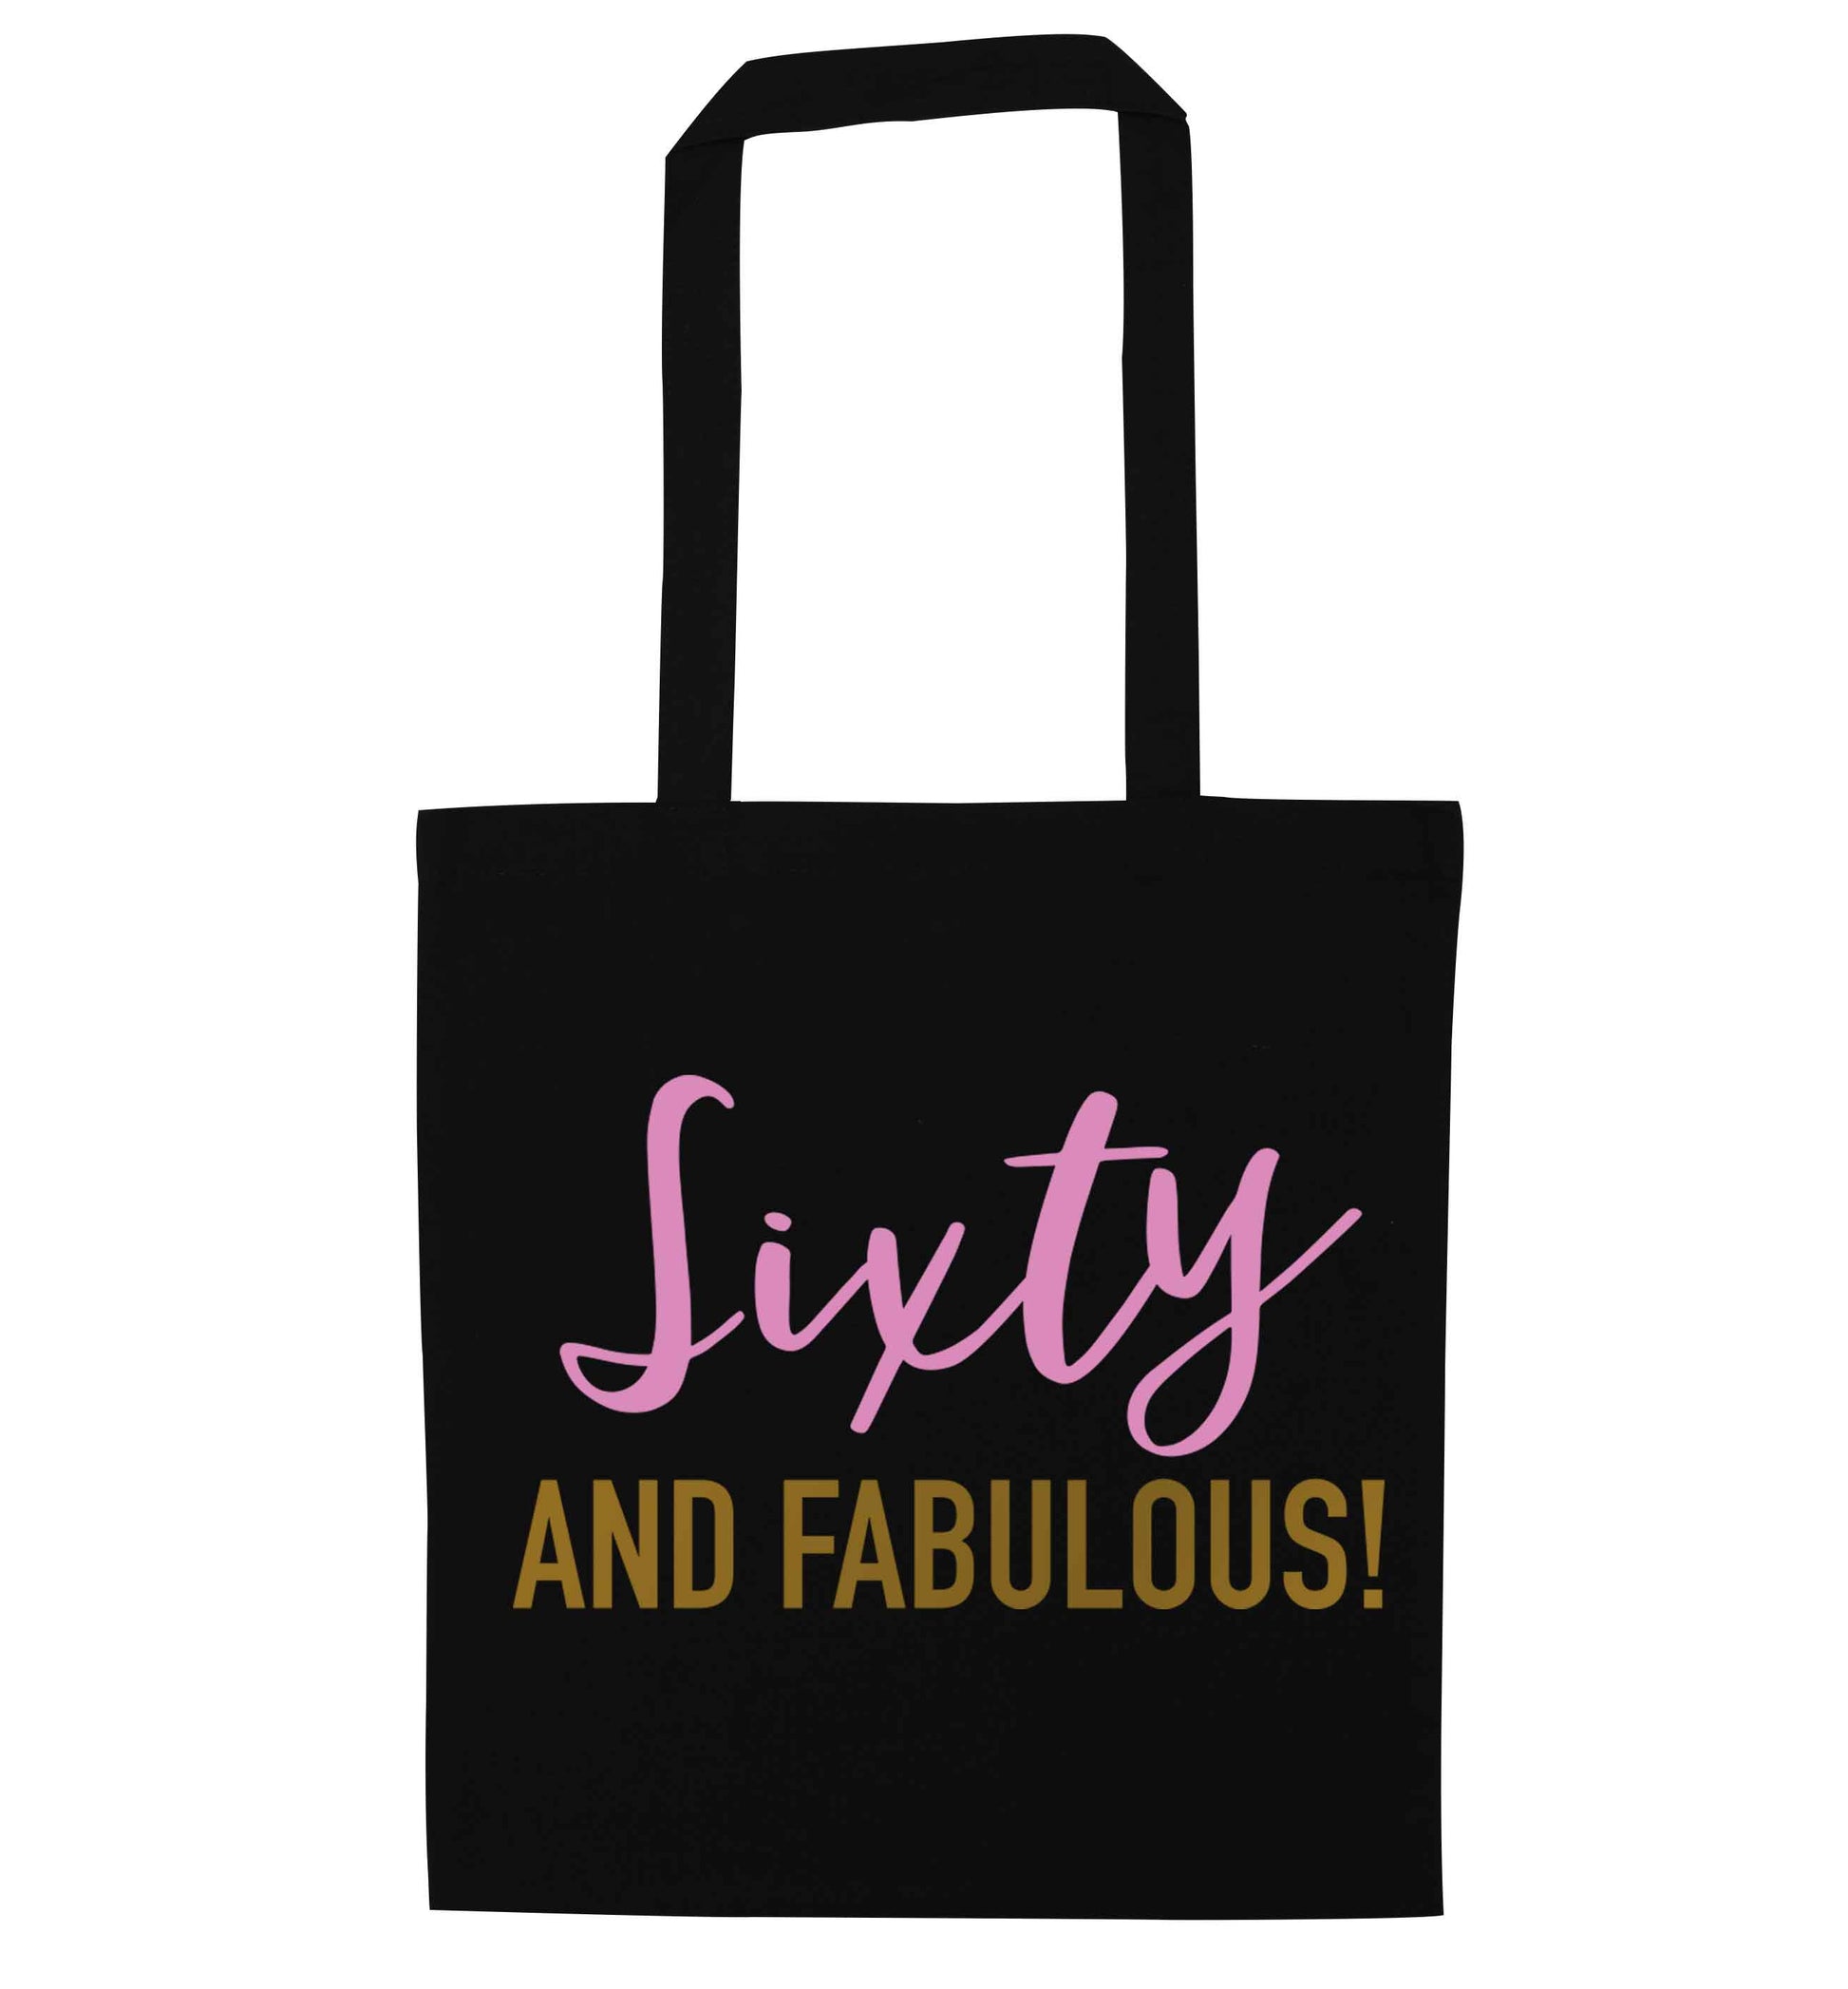 Sixty and fabulous black tote bag